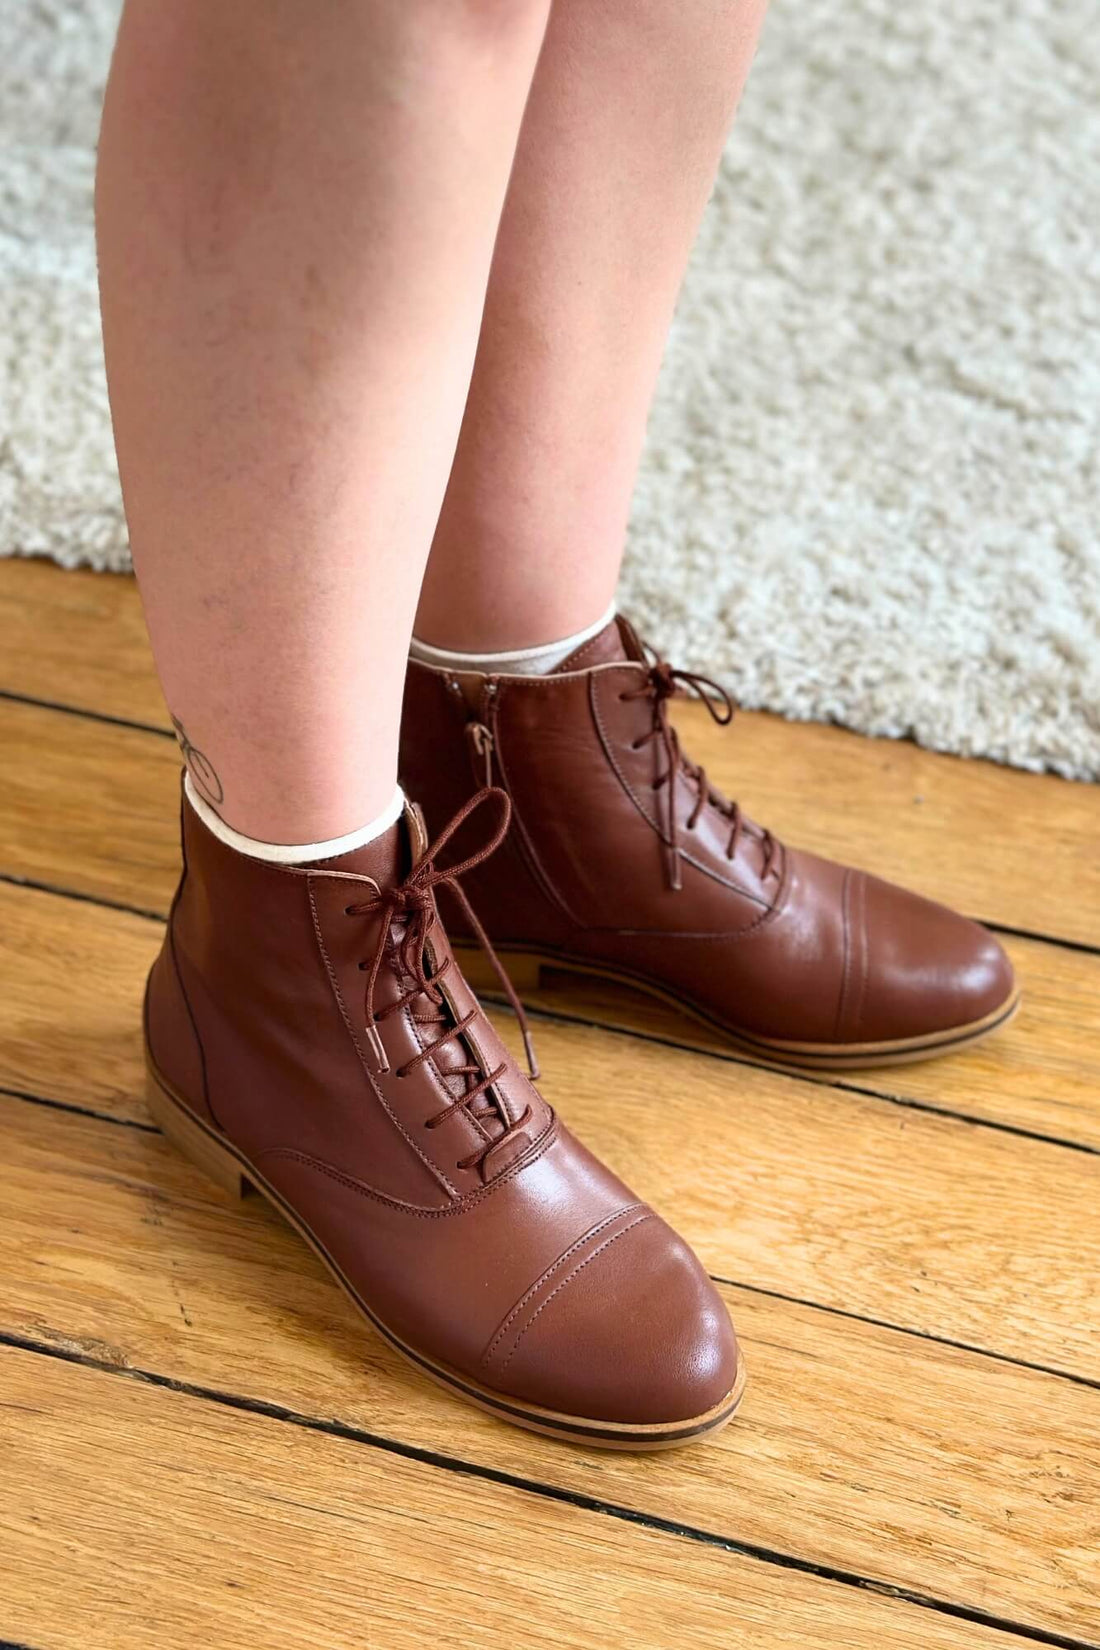 Mama Chestnut - Brown Leather Boots